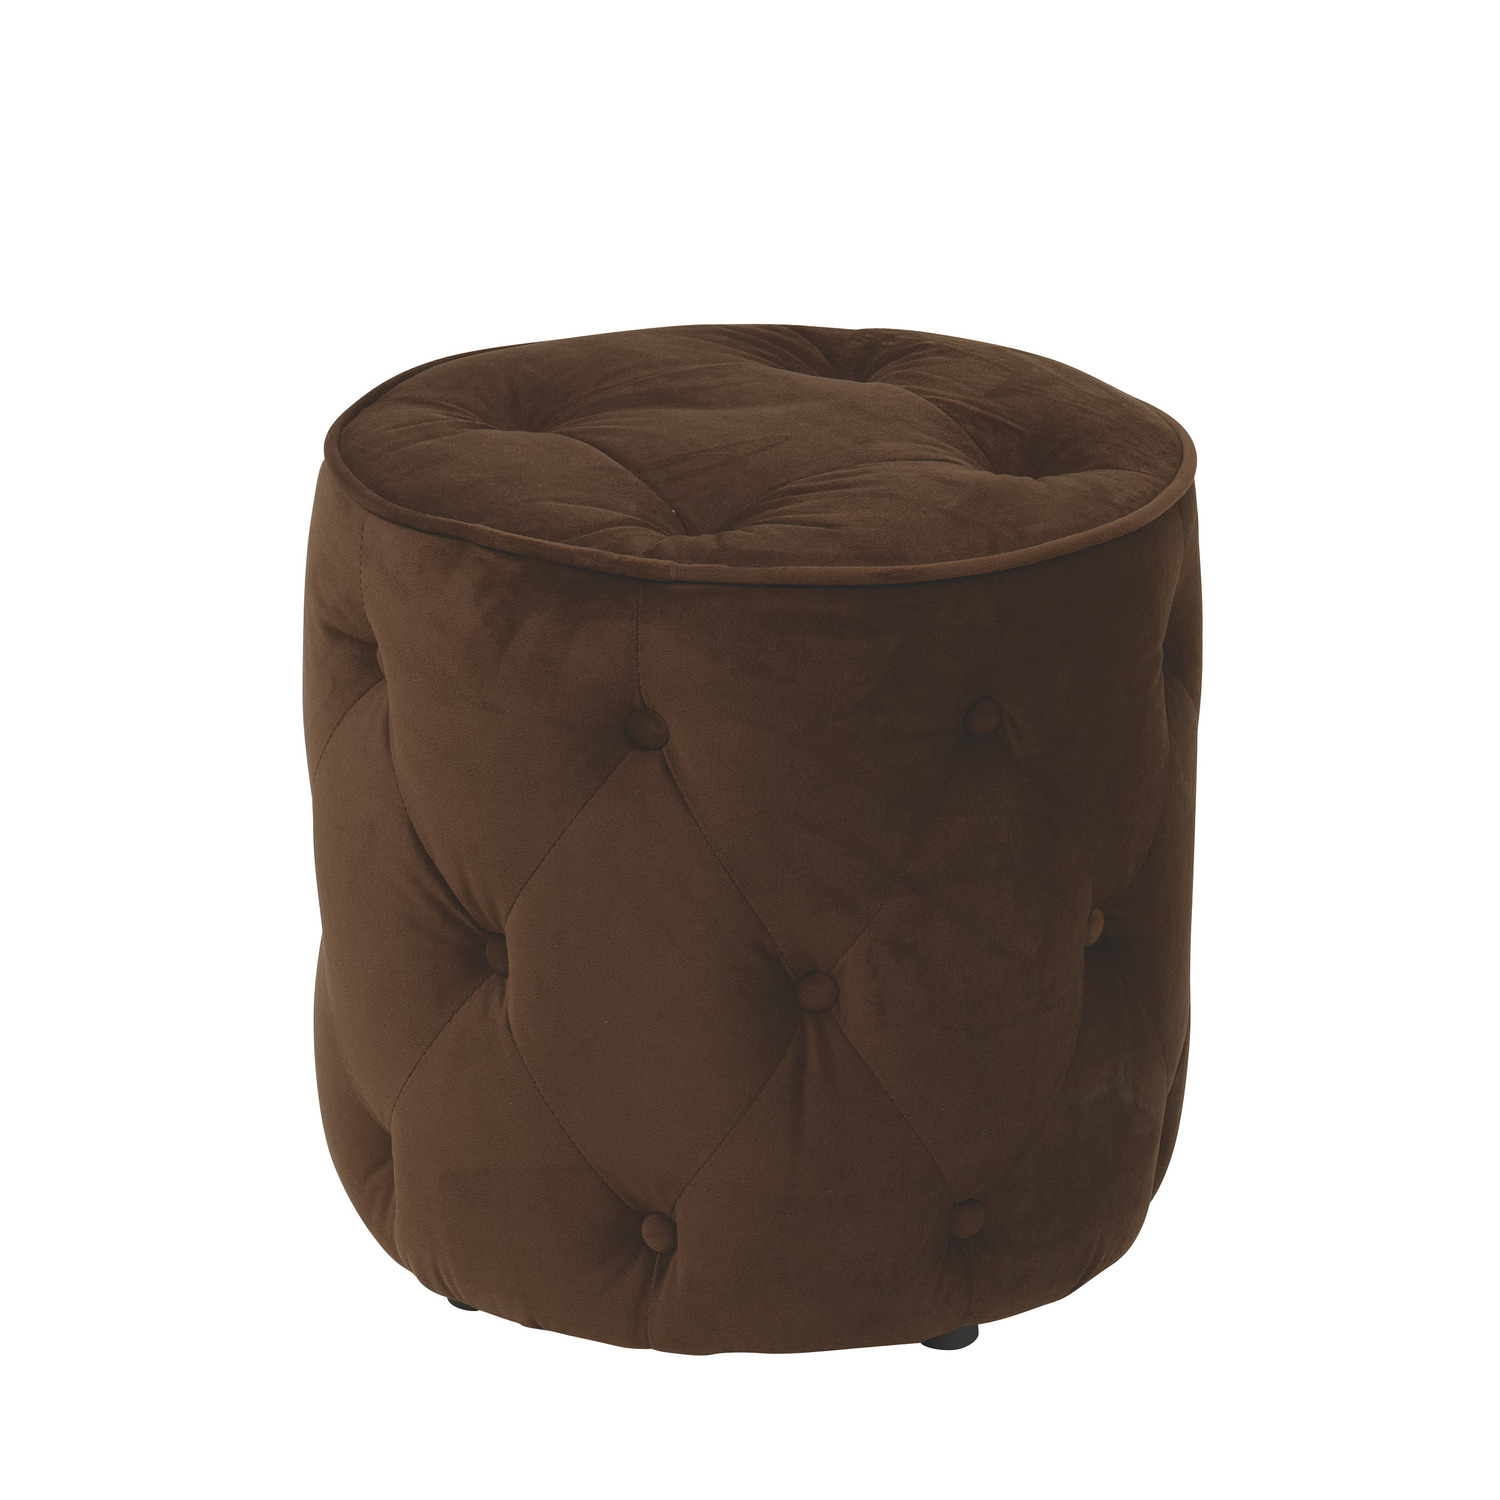 OSP Home Furnishings Curves Tufted Round Ottoman in Chocolate Velvet Fabric with Solid Wood Legs - image 1 of 2